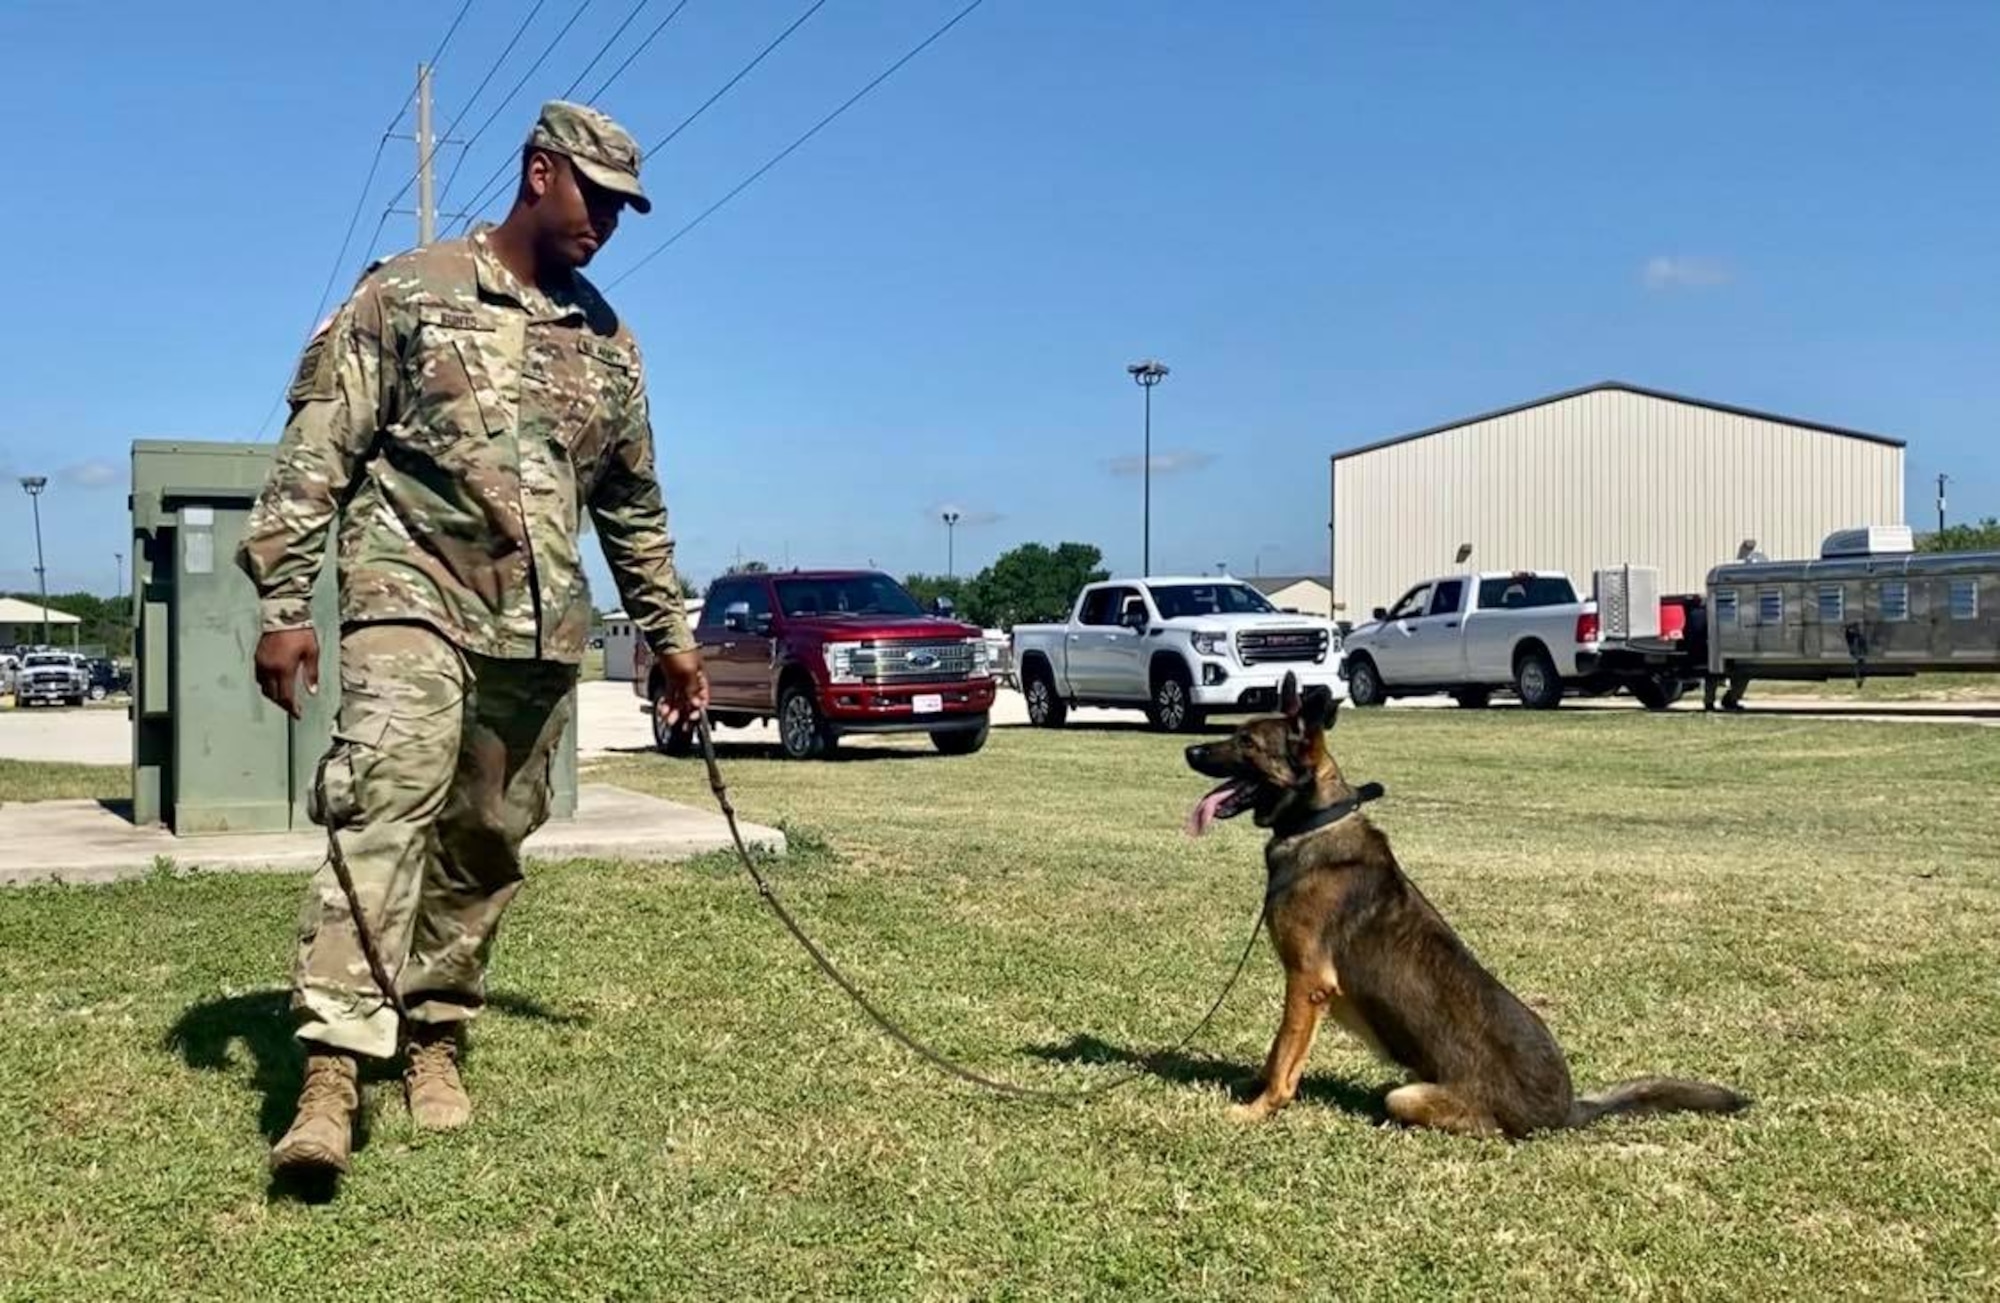 The 341st Training Squadron conducts all military working dog initial training as well as all MWD handlers courses for the Department of Defense right here at Joint Base San Antonio-Lackland, Texas. This elite team was able to share what they do with a class of 4th grade students from Buda Elementary School during a virtual canine demonstration, May 18, 2020.